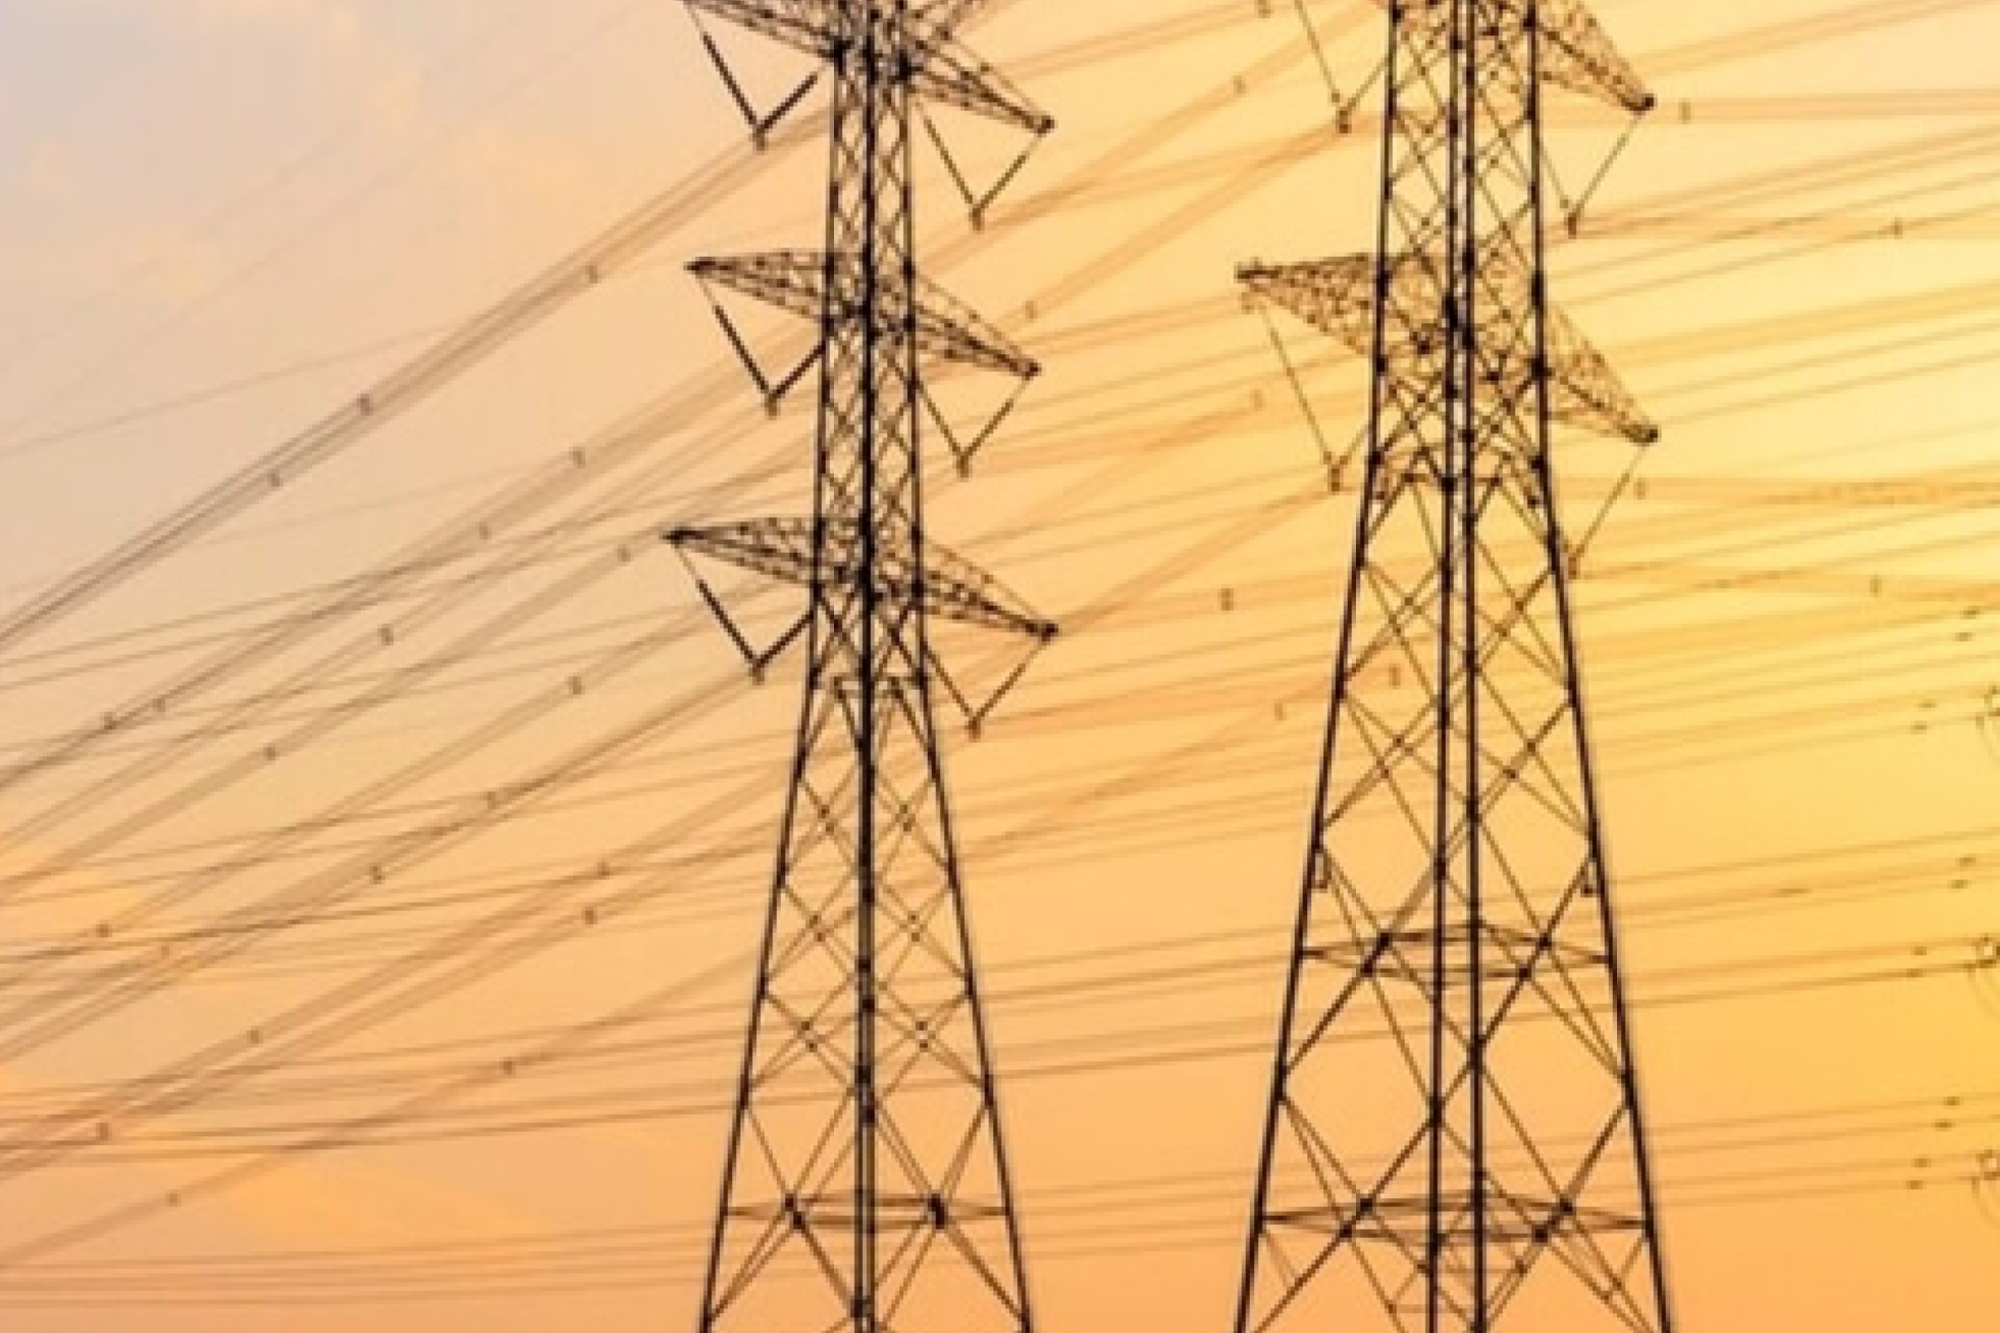 POWERGRID acquires two transmission projects in Rajasthan